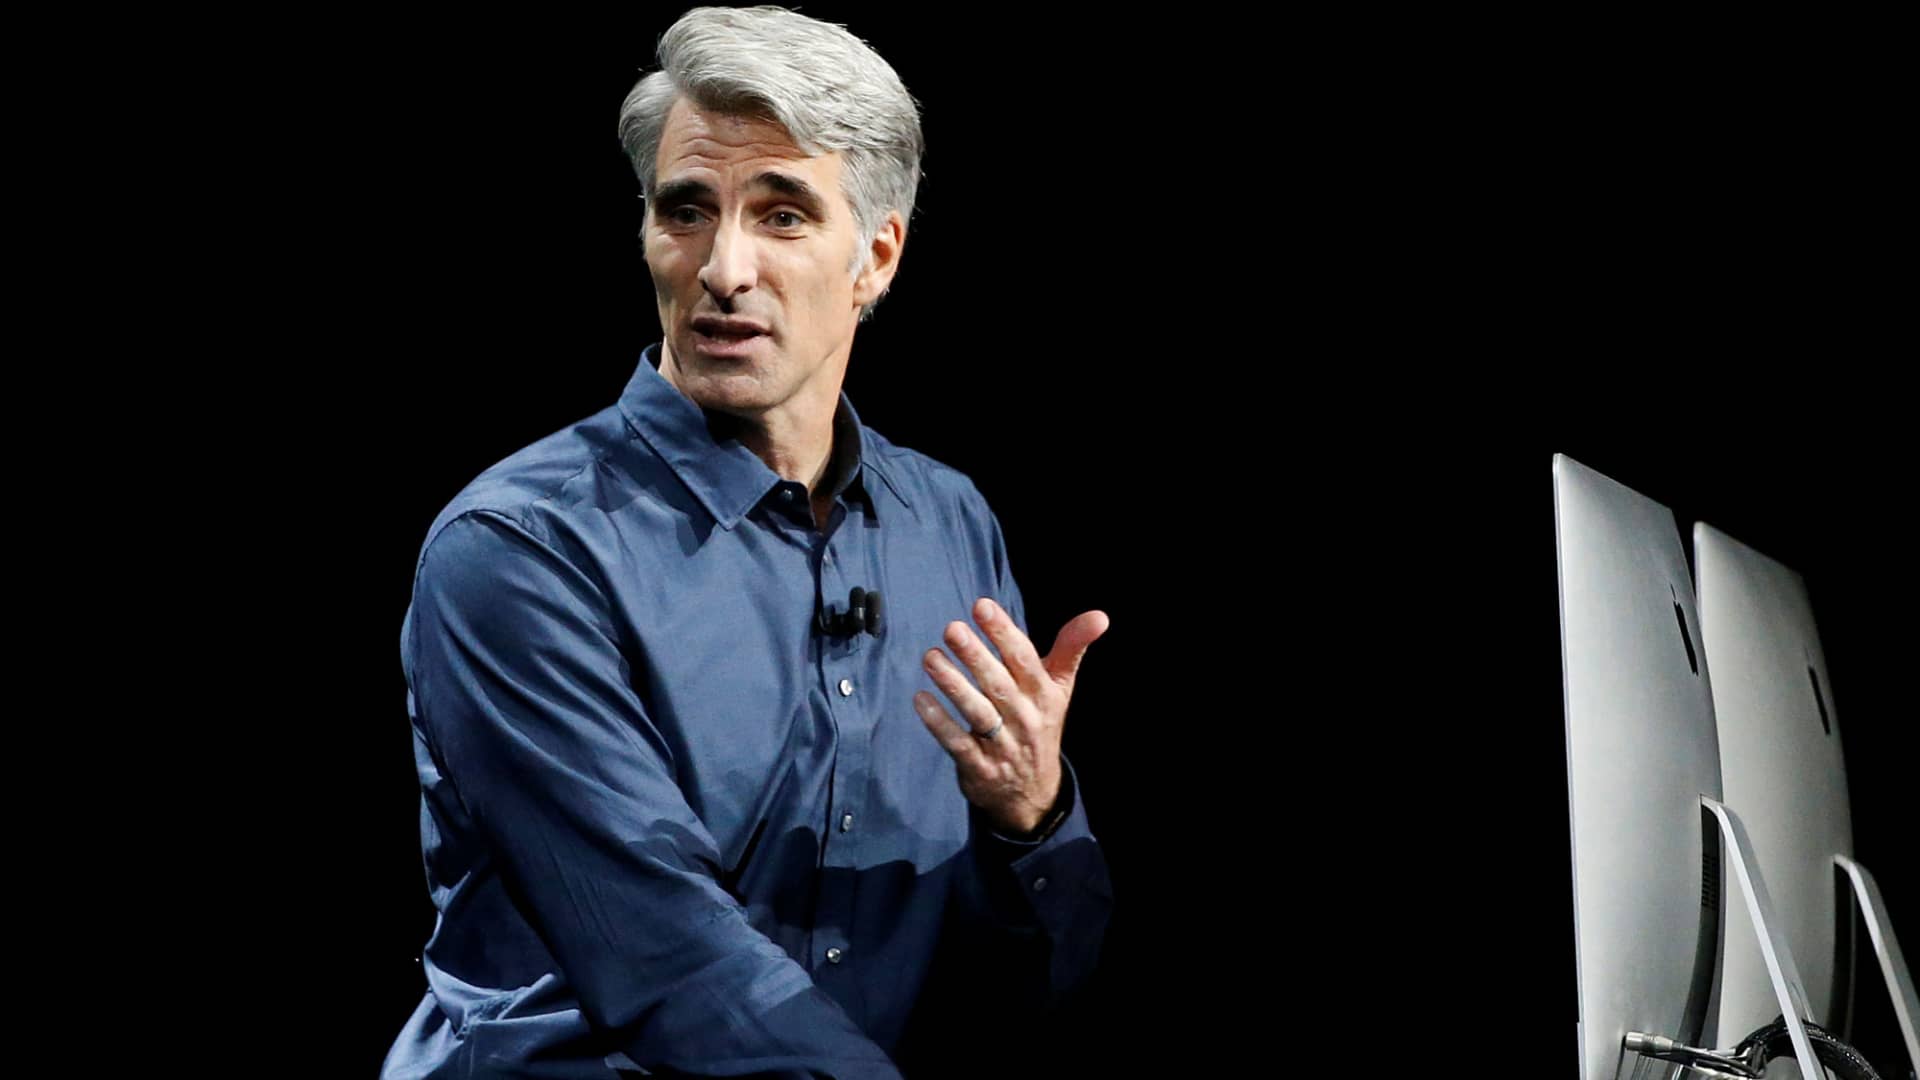 Craig Federighi, Senior Vice President of Software Engineering for Apple, discusses the Siri desktop assistant for MacOS Sierra at the company's Worldwide Developers Conference in San Francisco, June 13, 2016.